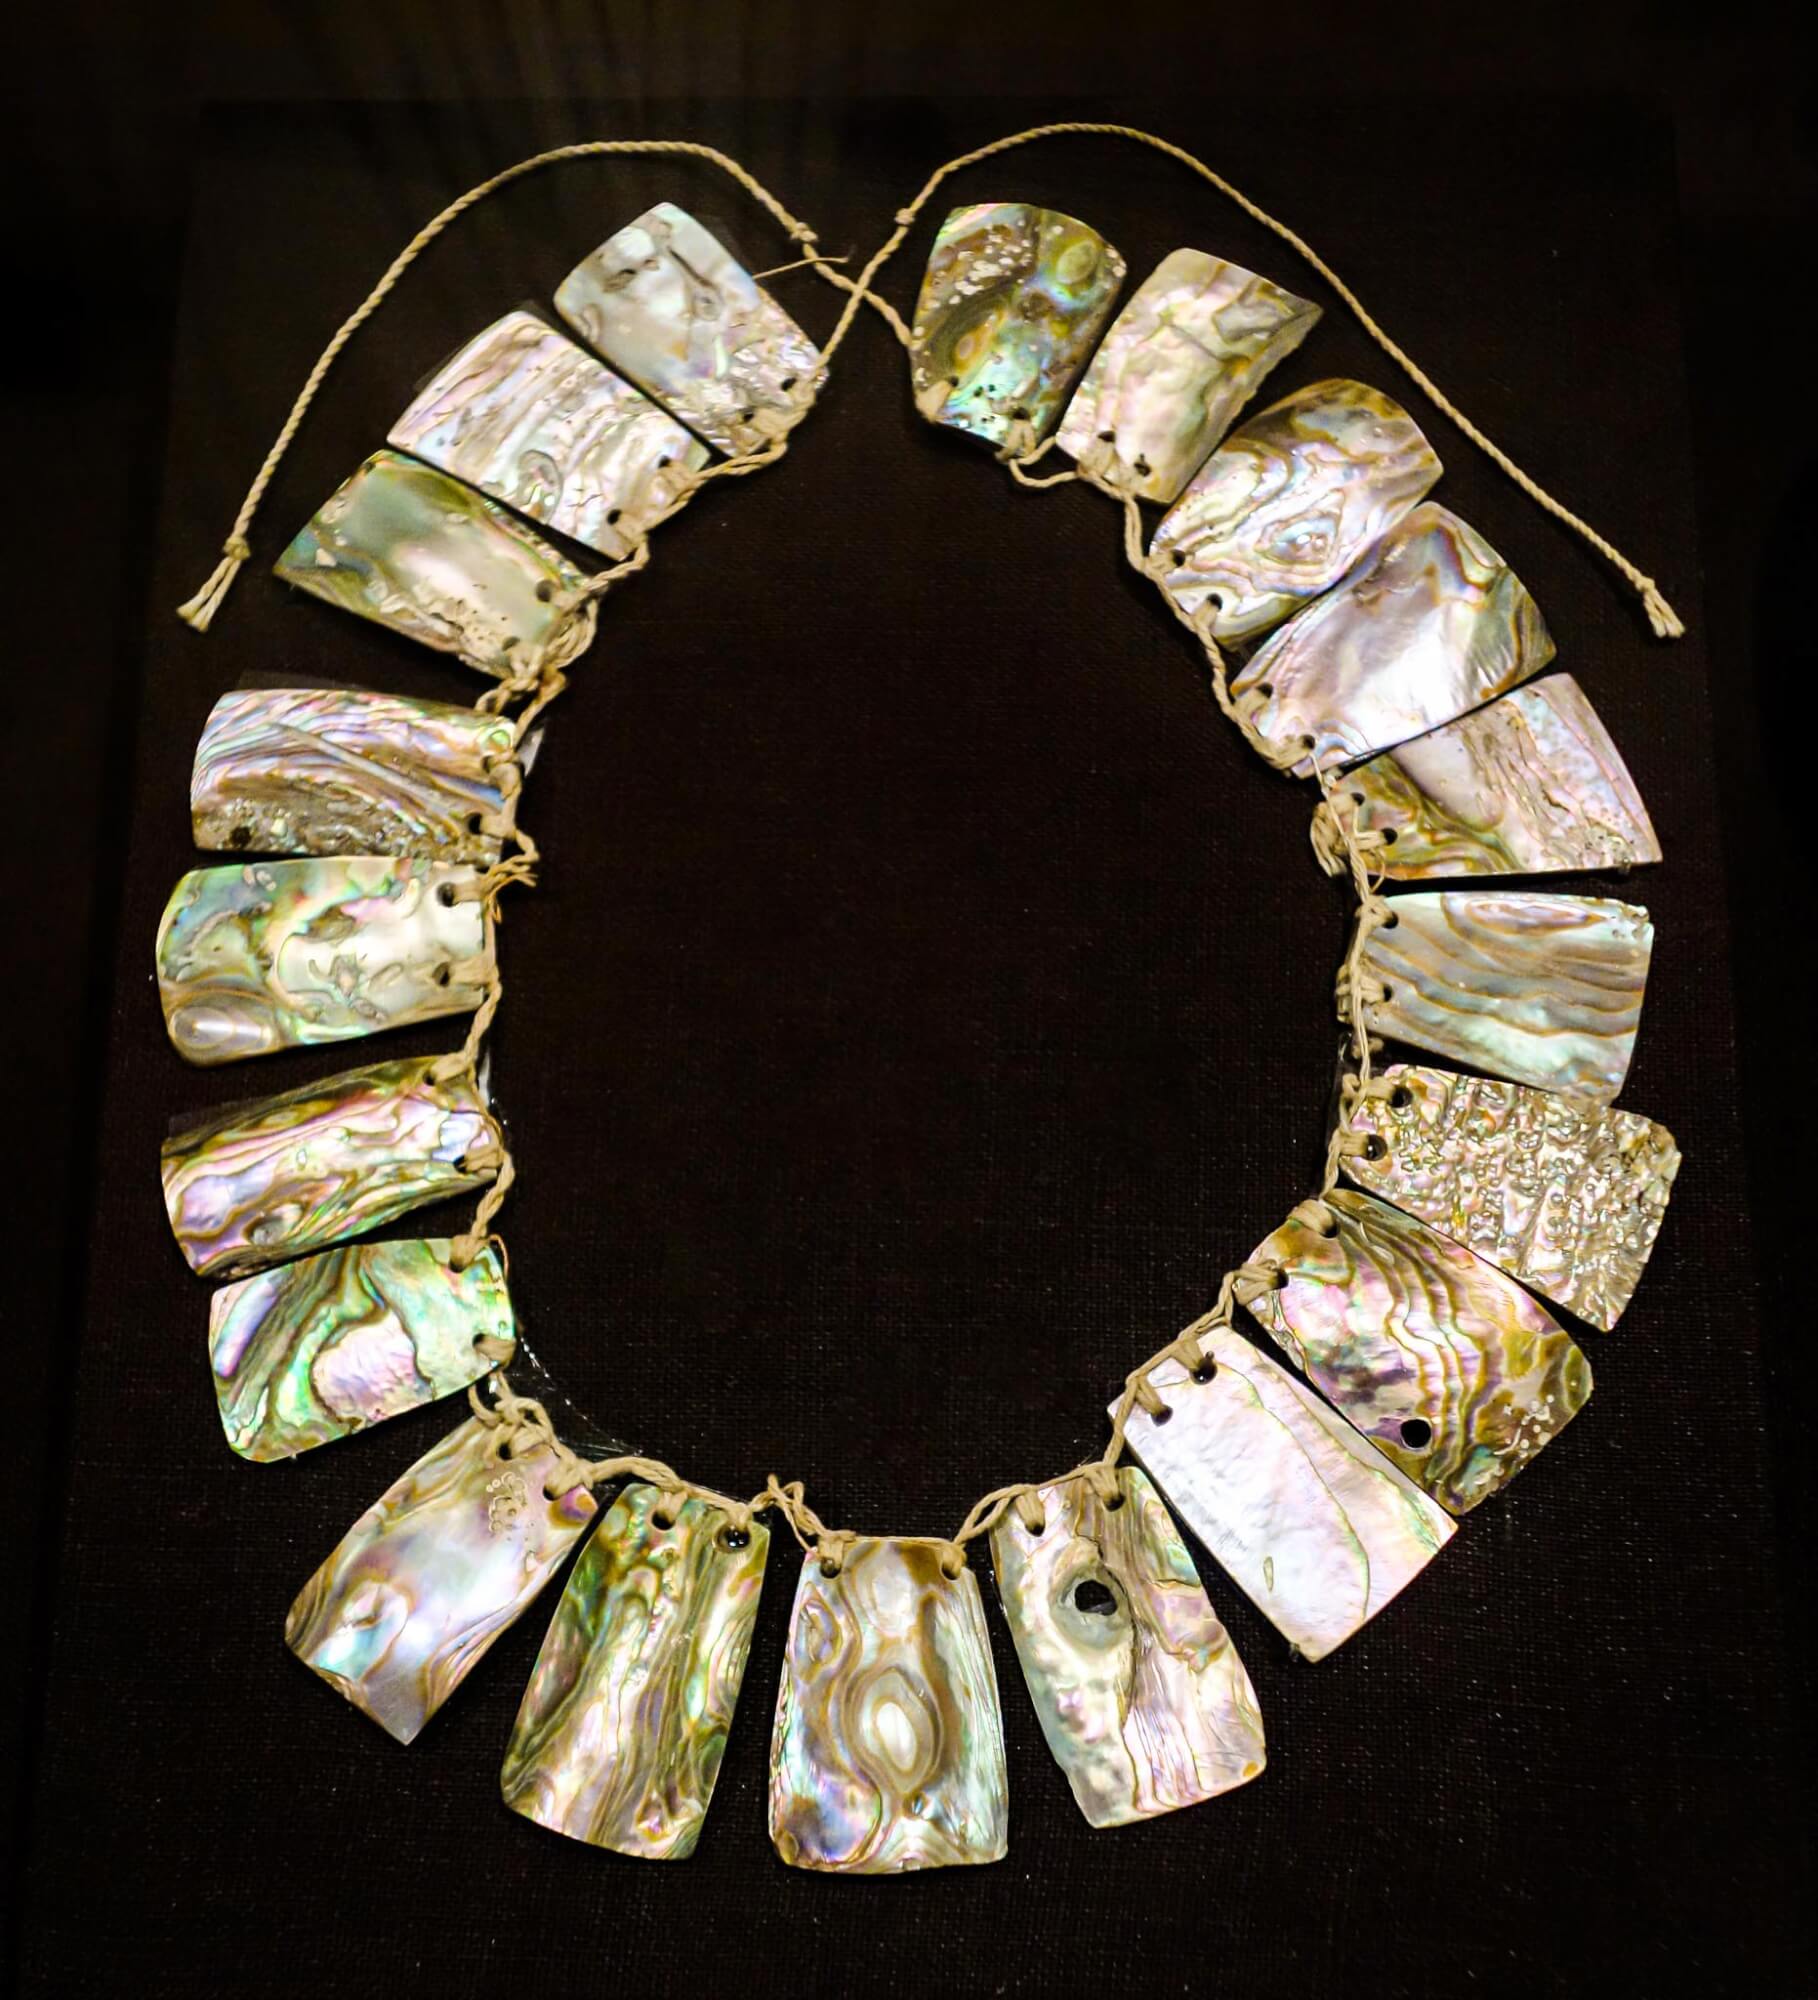 Image showcasing Miwok Abalone Necklace from the Oakland Museum